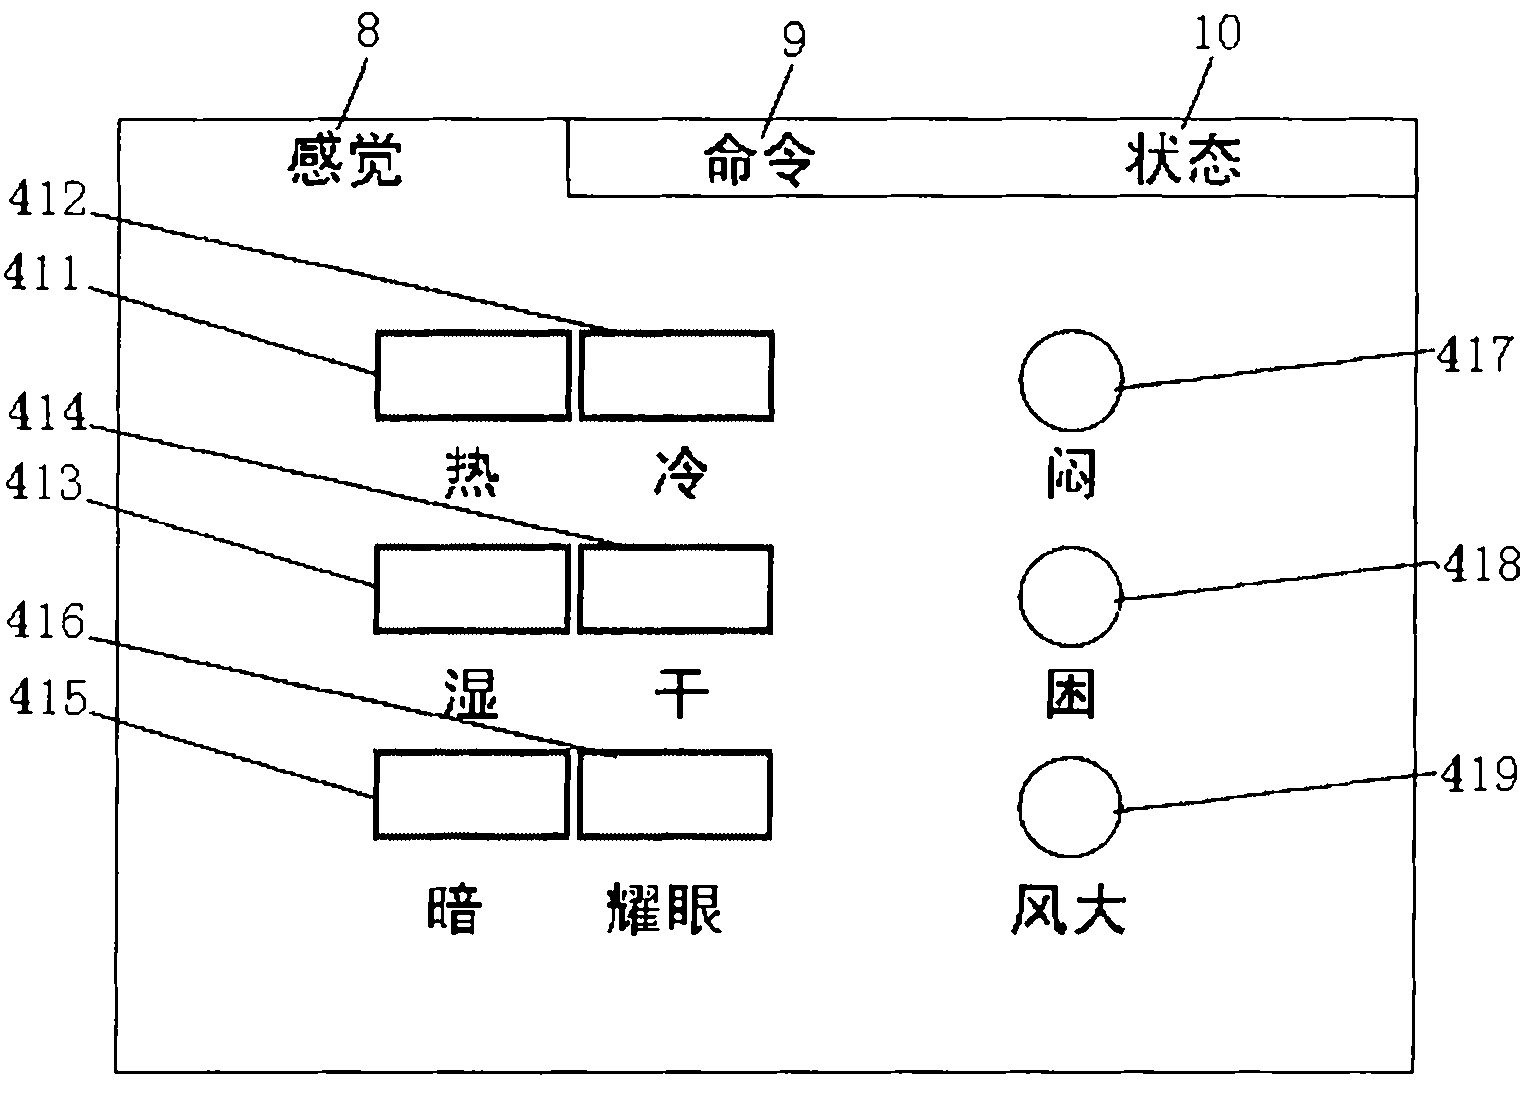 Bi-directional interaction human-computer interface of building environment control system